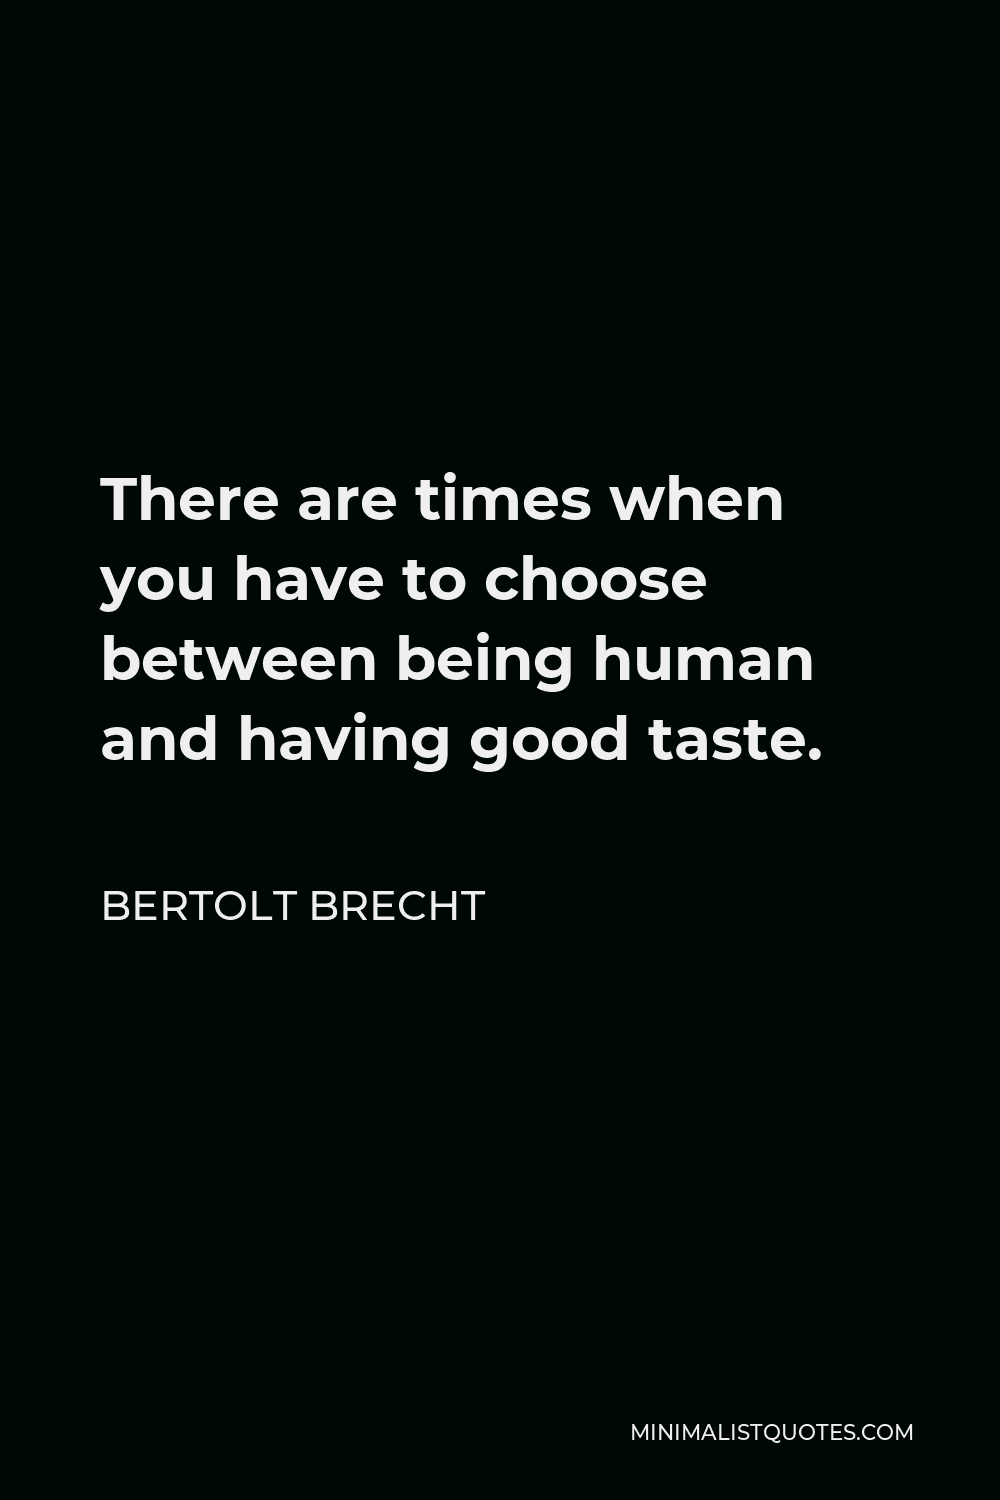 Bertolt Brecht Quote - There are times when you have to choose between being human and having good taste.